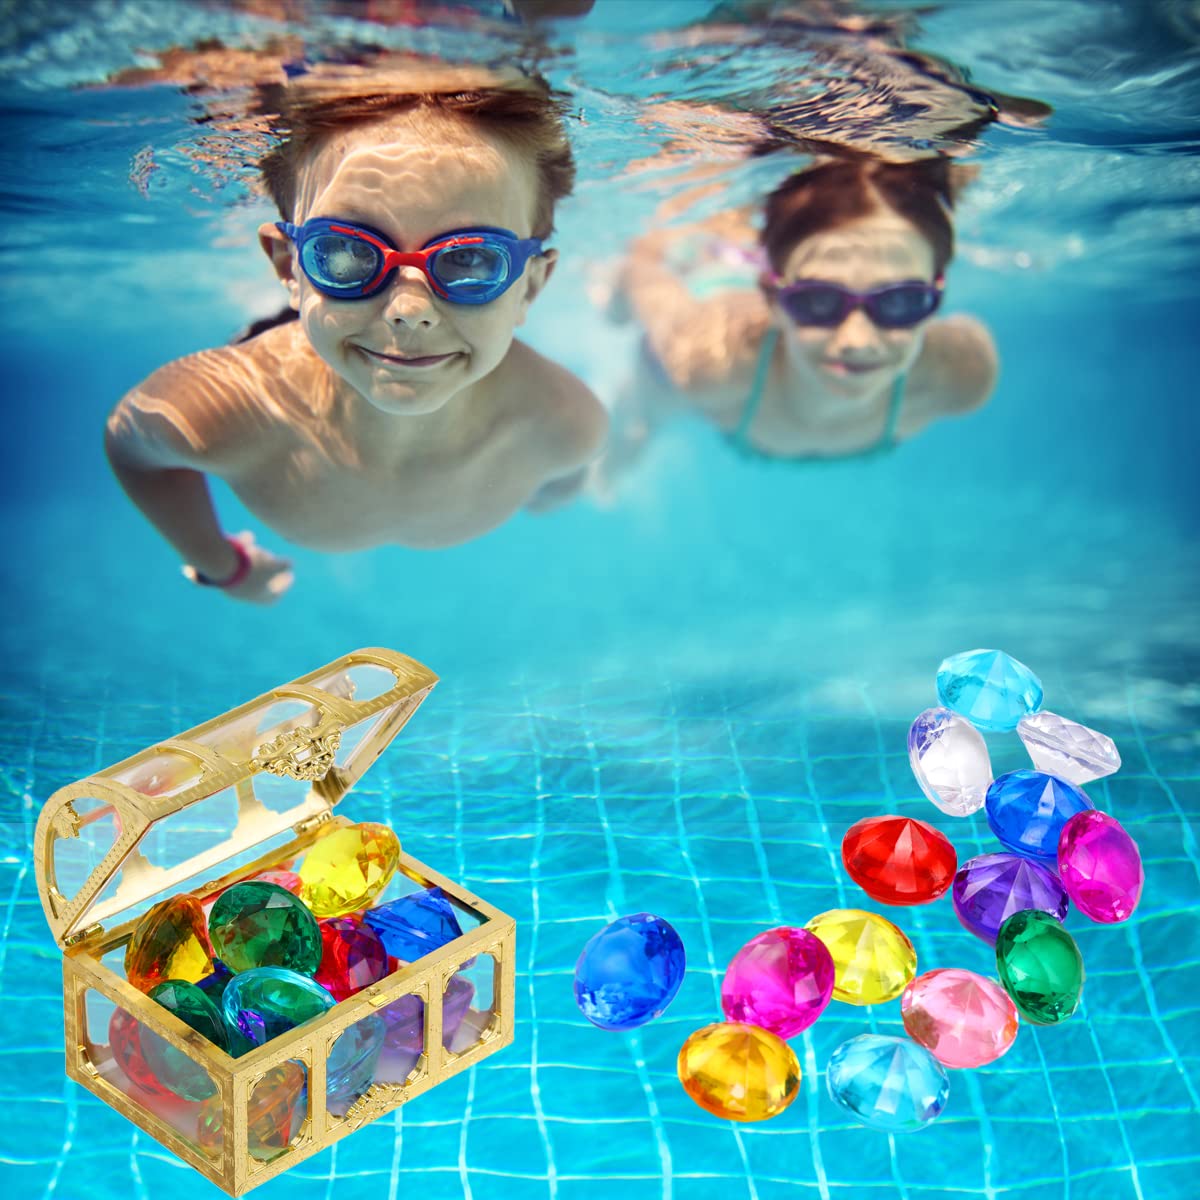 CHENYU Diving gem Pool Toys Sand Toys,14 Color Diamond Treasure Chest Summer Swimming gems Pirate Diving Toy Set Underwater Swimming toyChildren's Game Gifts for Boys and Girls (Golden)